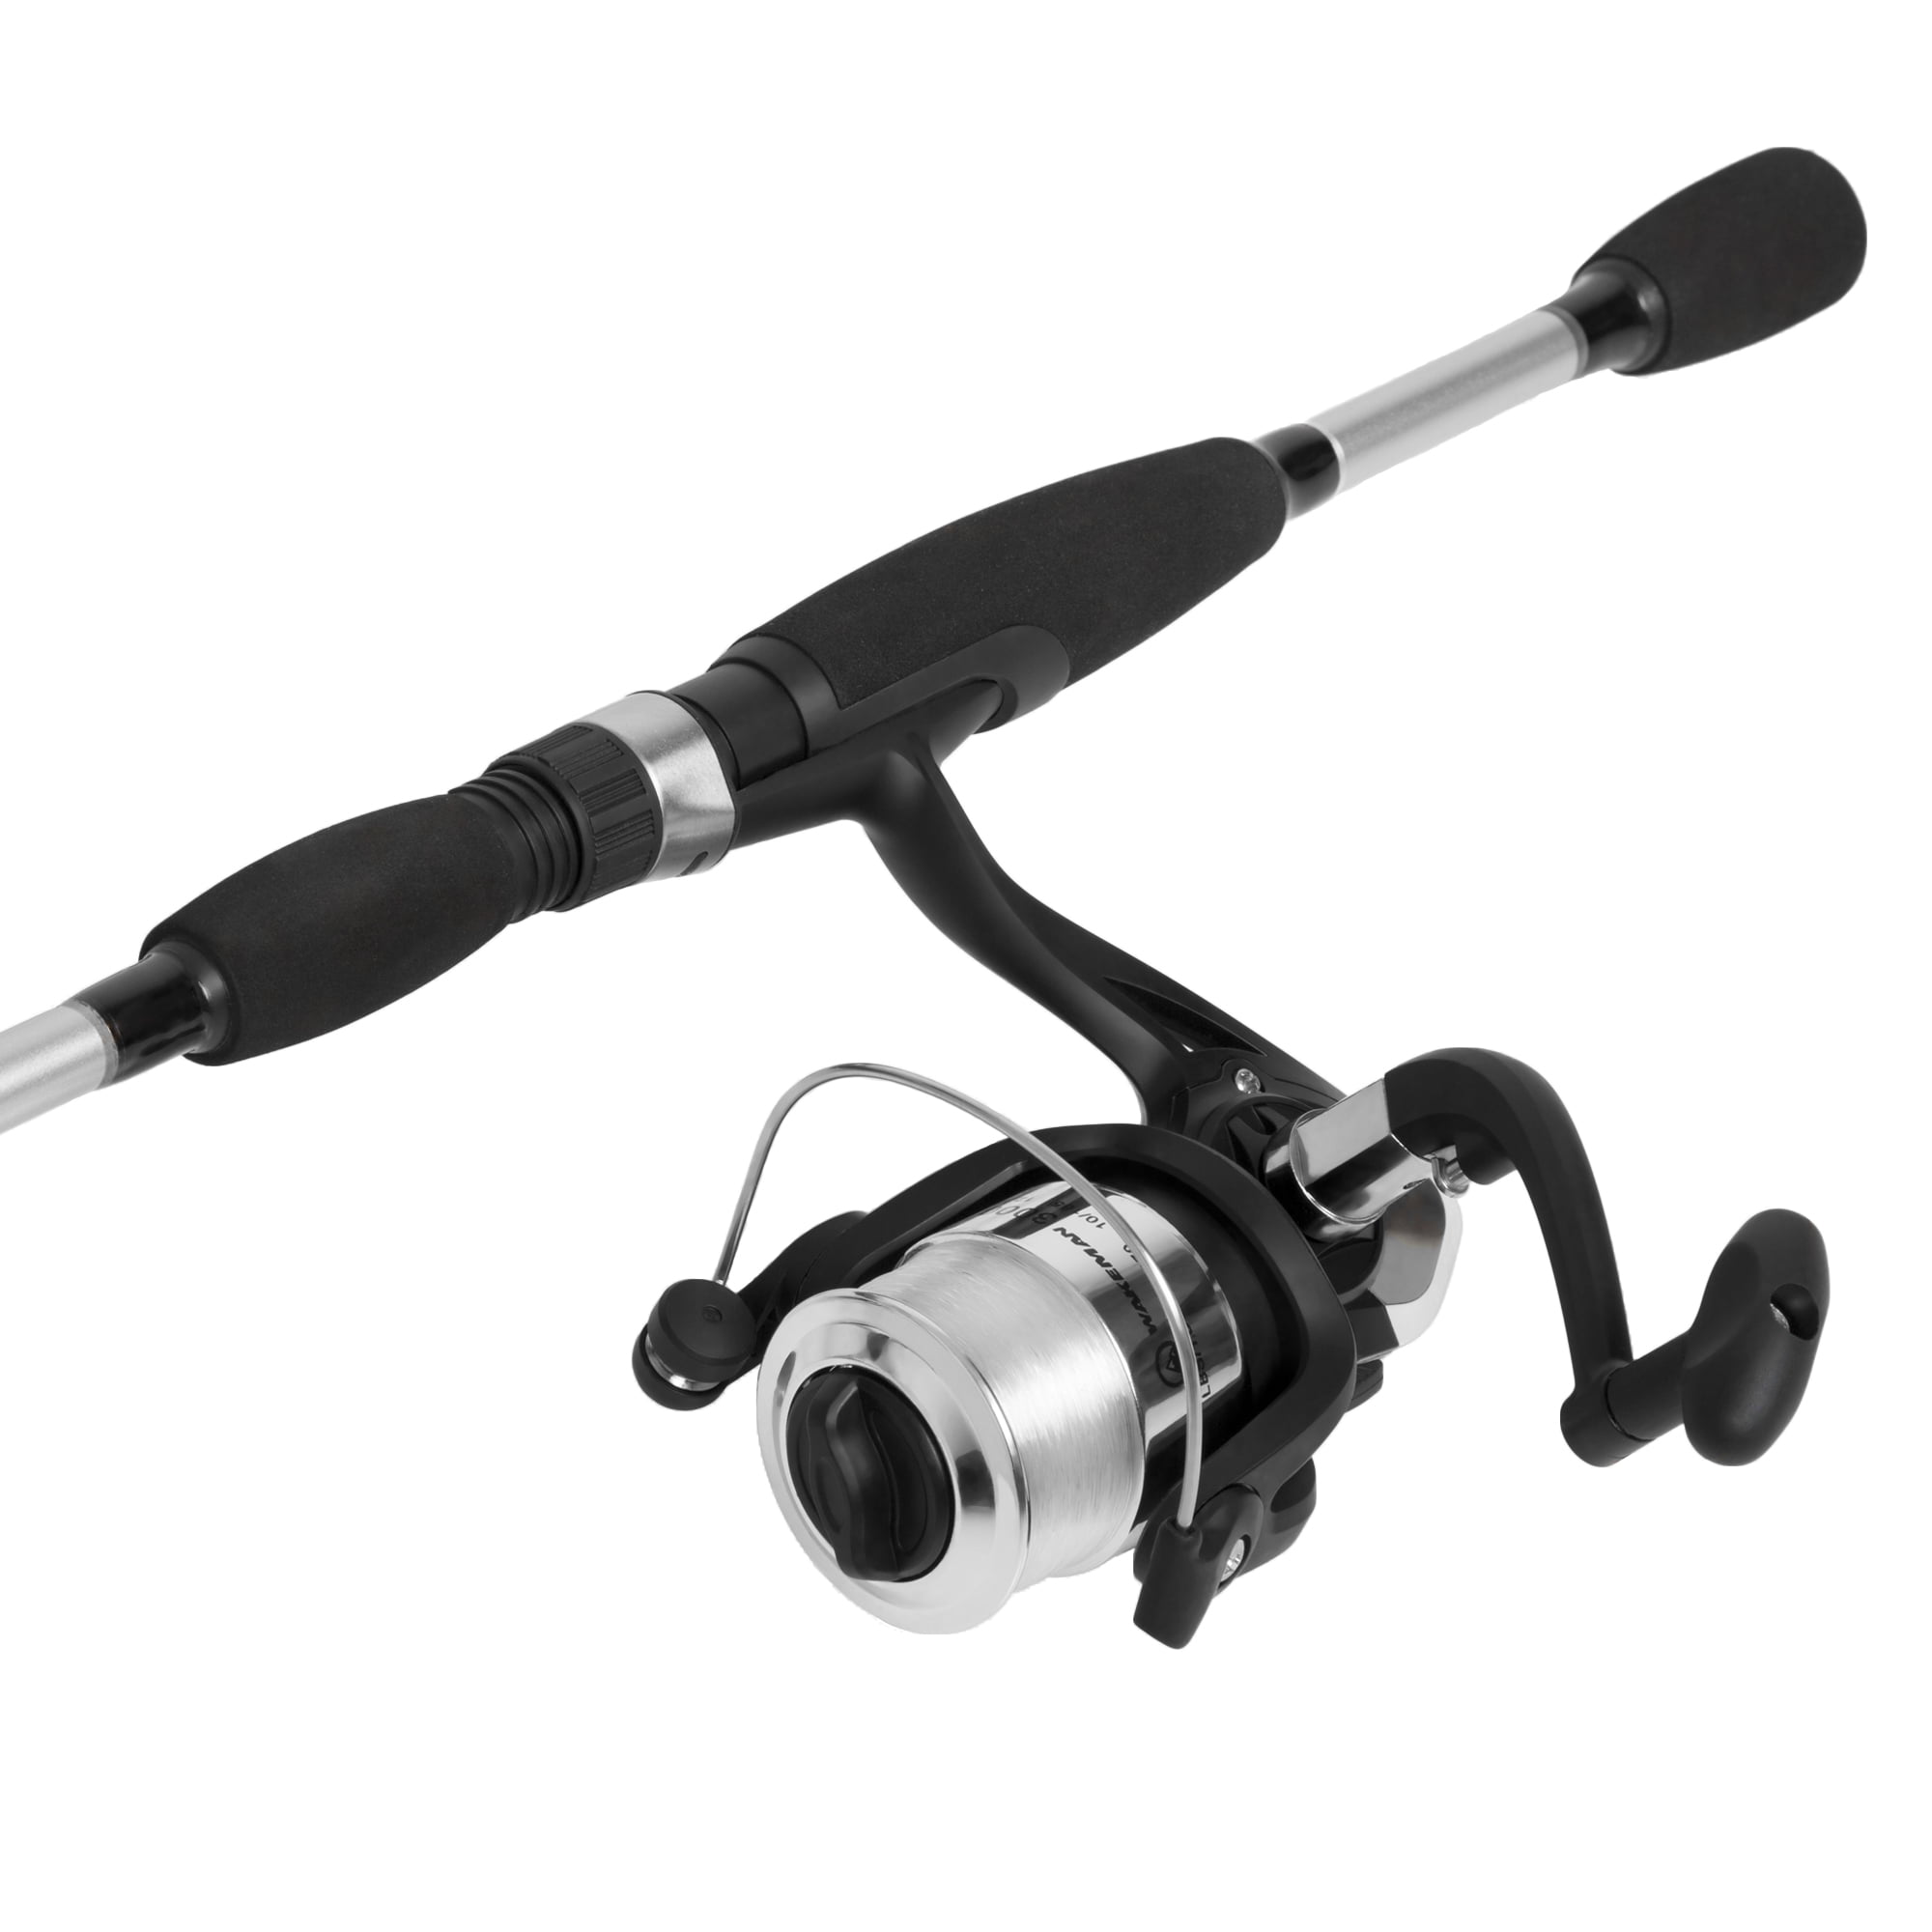 Fishing Rod and Reel Combo, Spinning Reel Fishing Pole, Fishing Gear for  Bass and Trout Fishing, Silver – Lake Fishing, Strike Series by Wakeman 